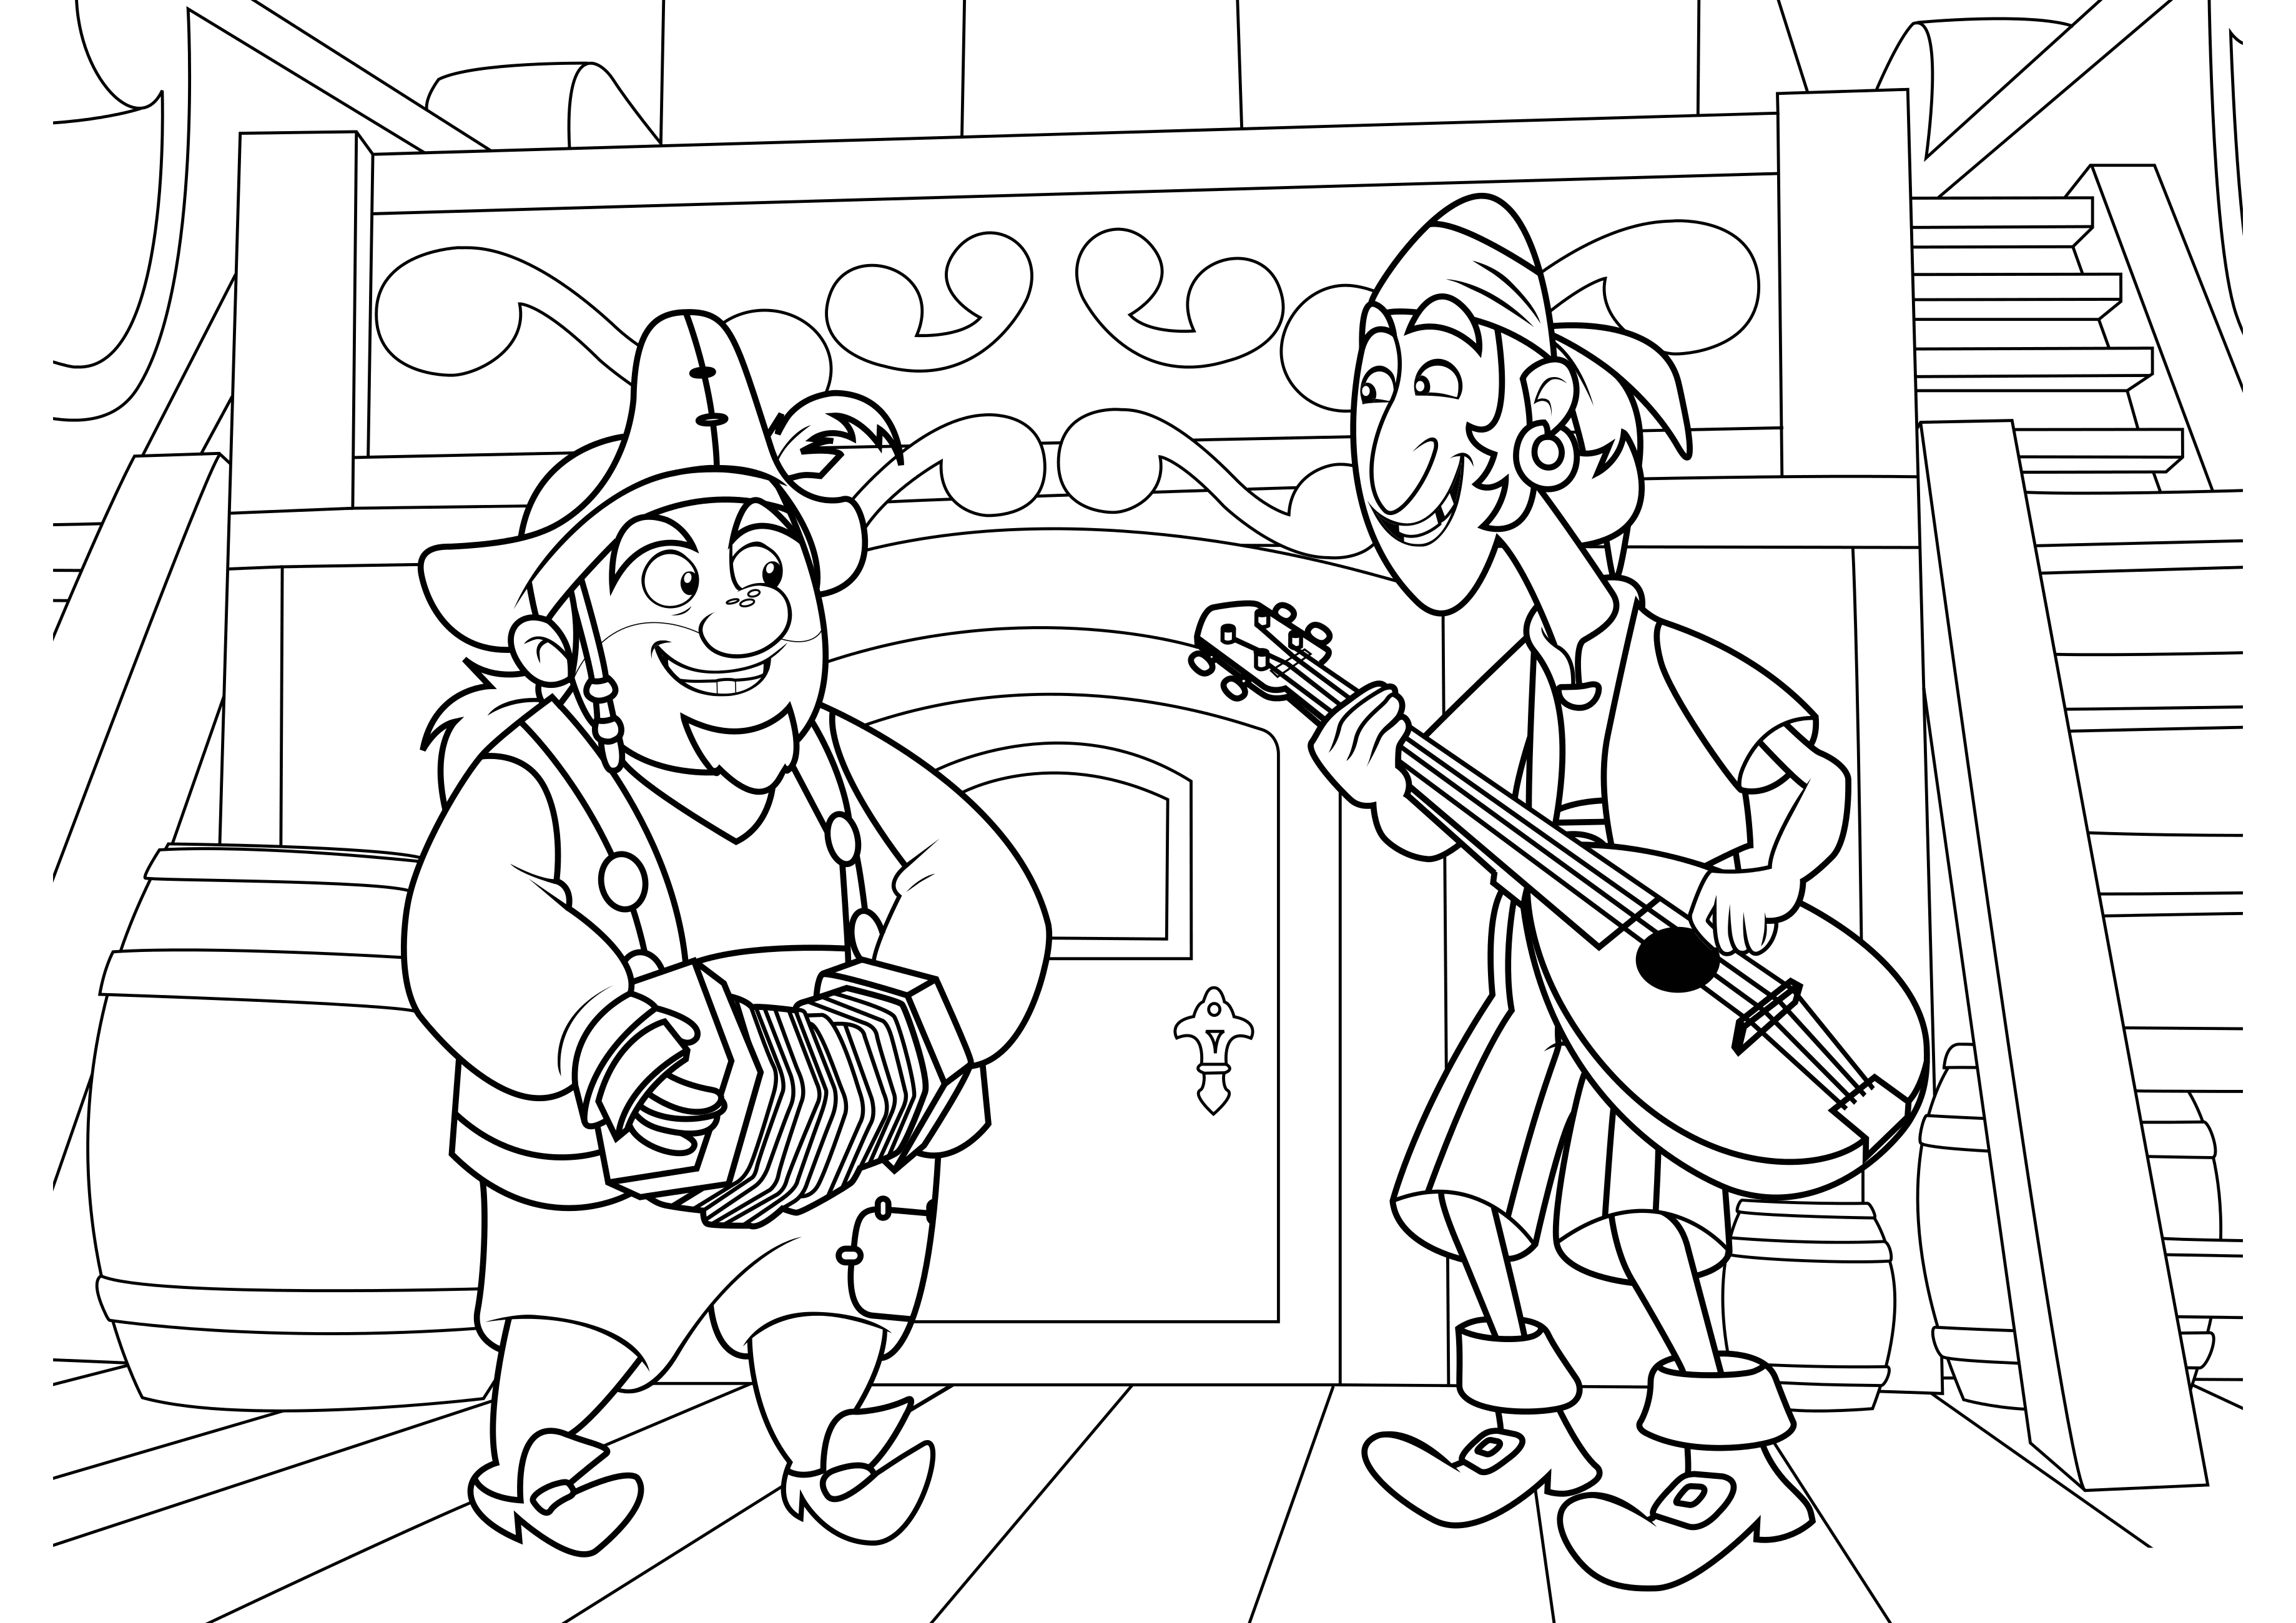 Coloring page Jake and the Never Land Pirates Pirate music